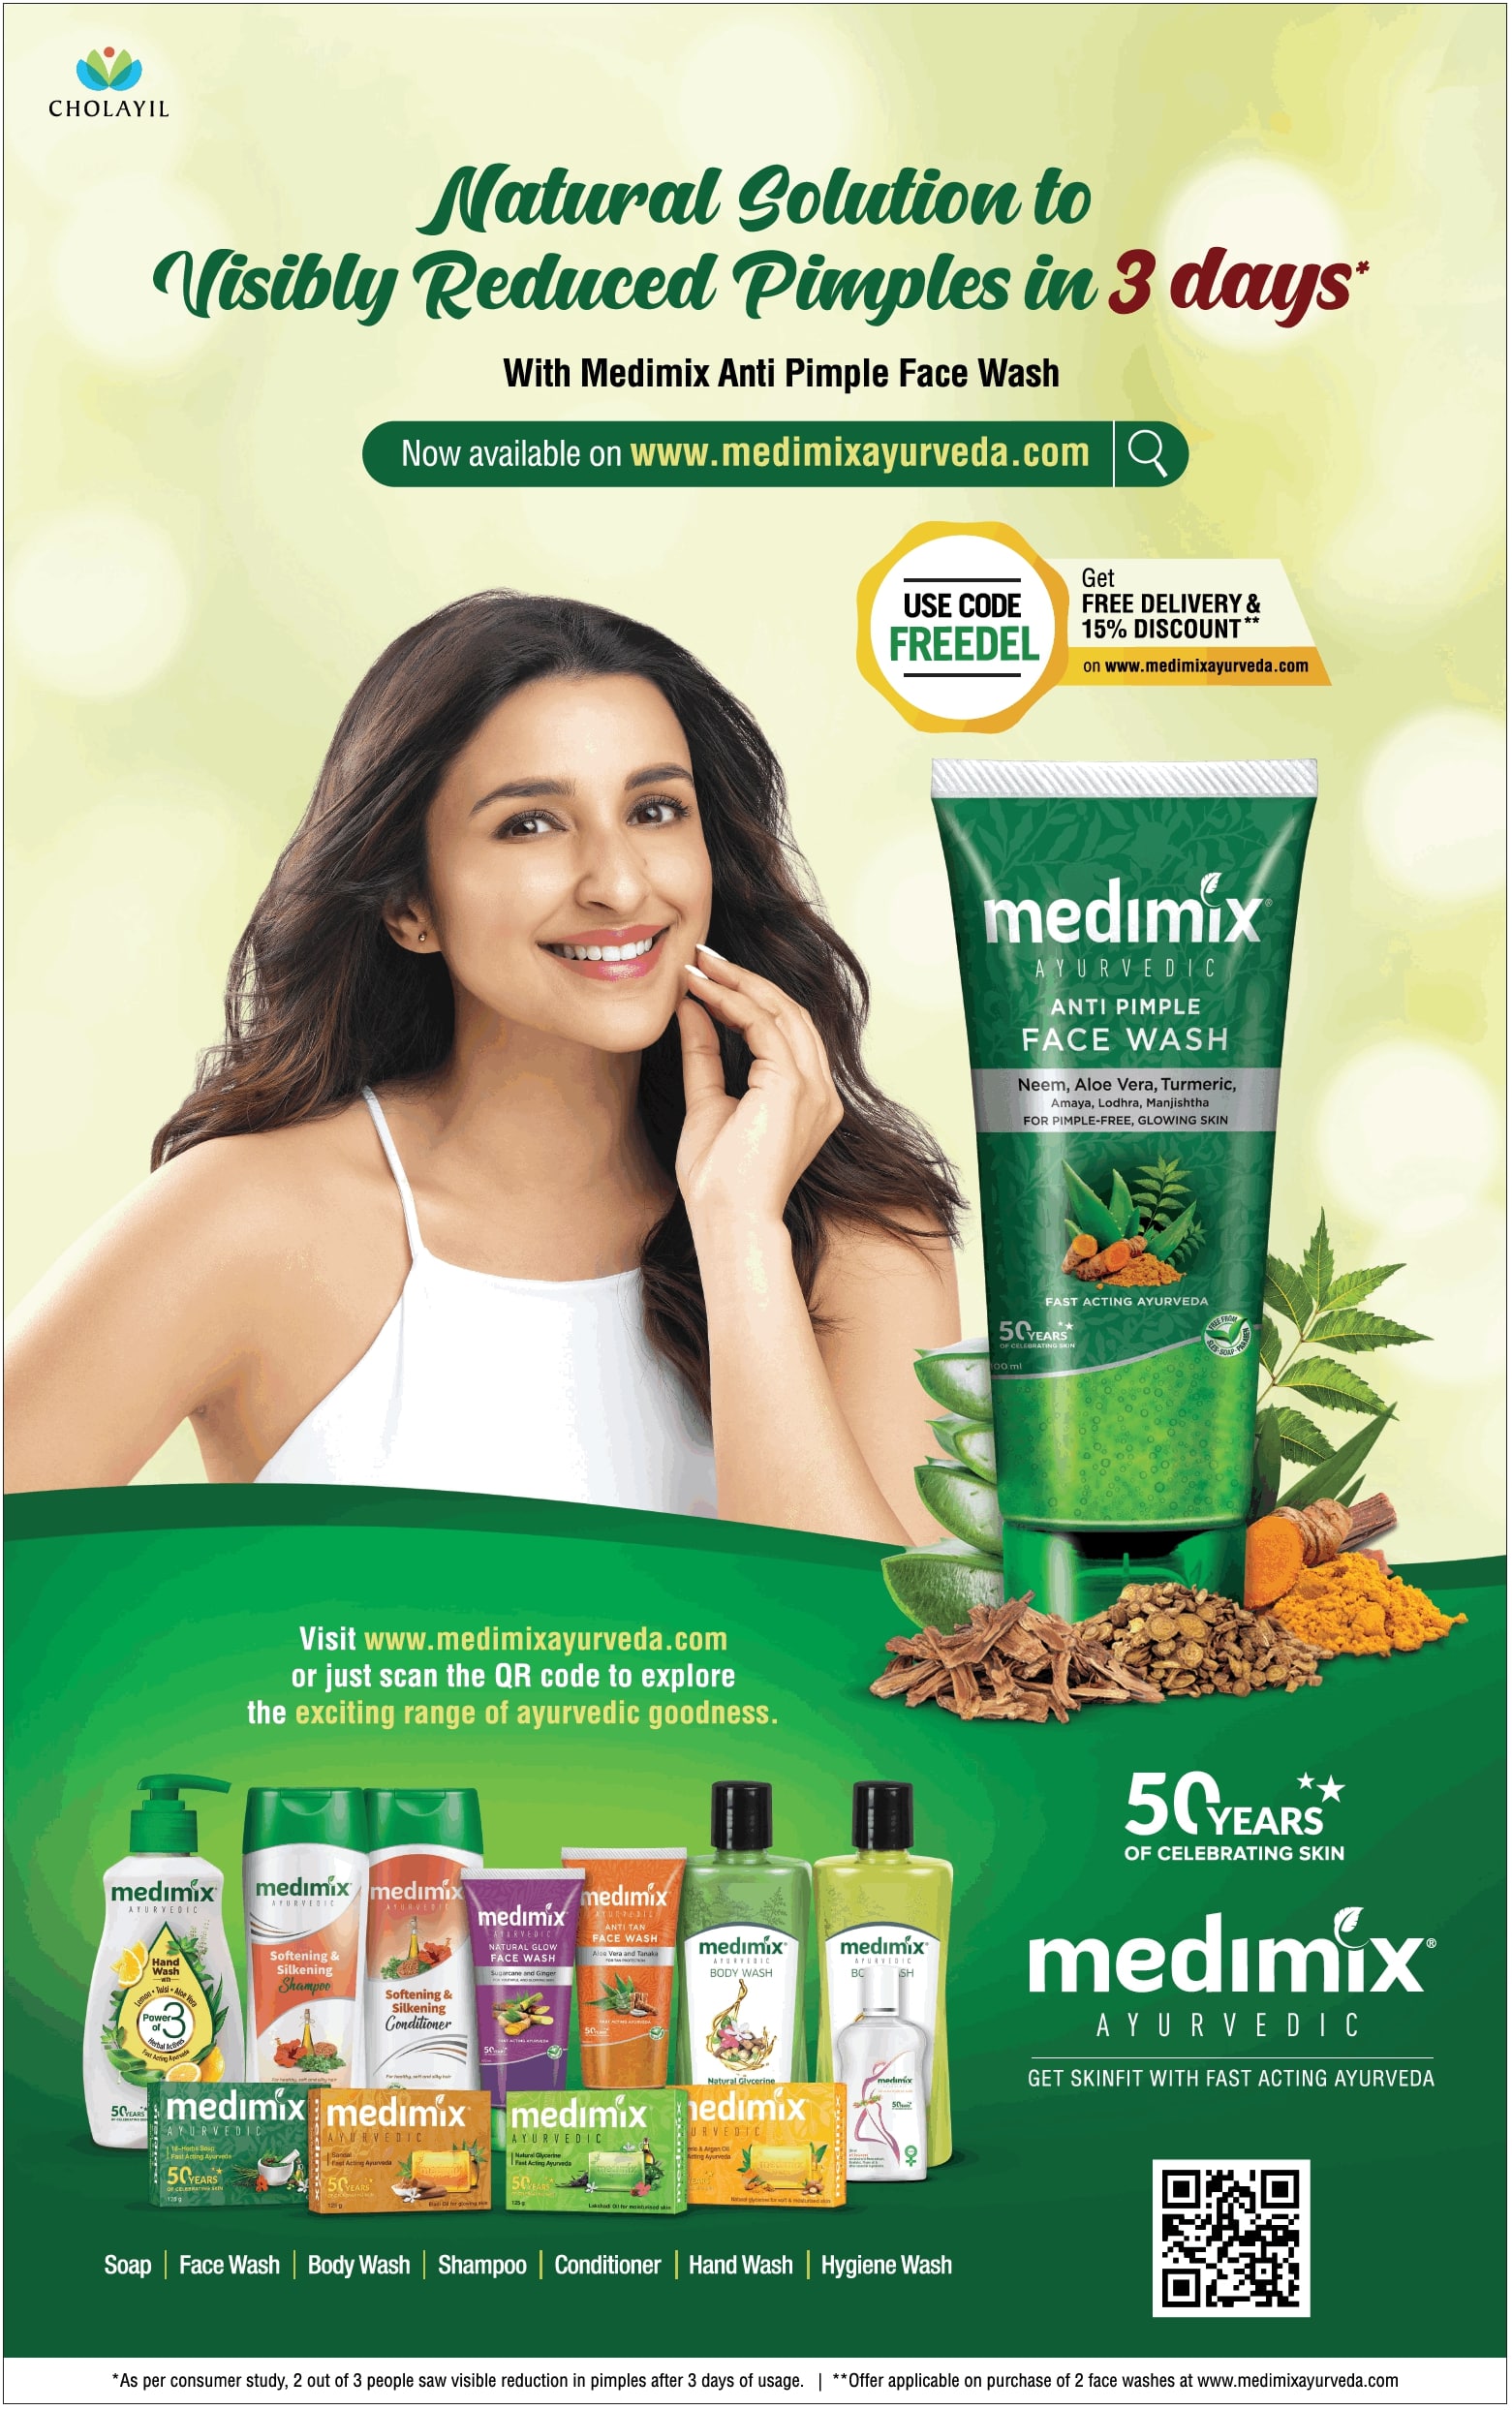 medimix-natural-solution-to-visibly-reduced-pimples-in-3-days-parinidhi-chopra-ad-bombay-times-06-06-2021